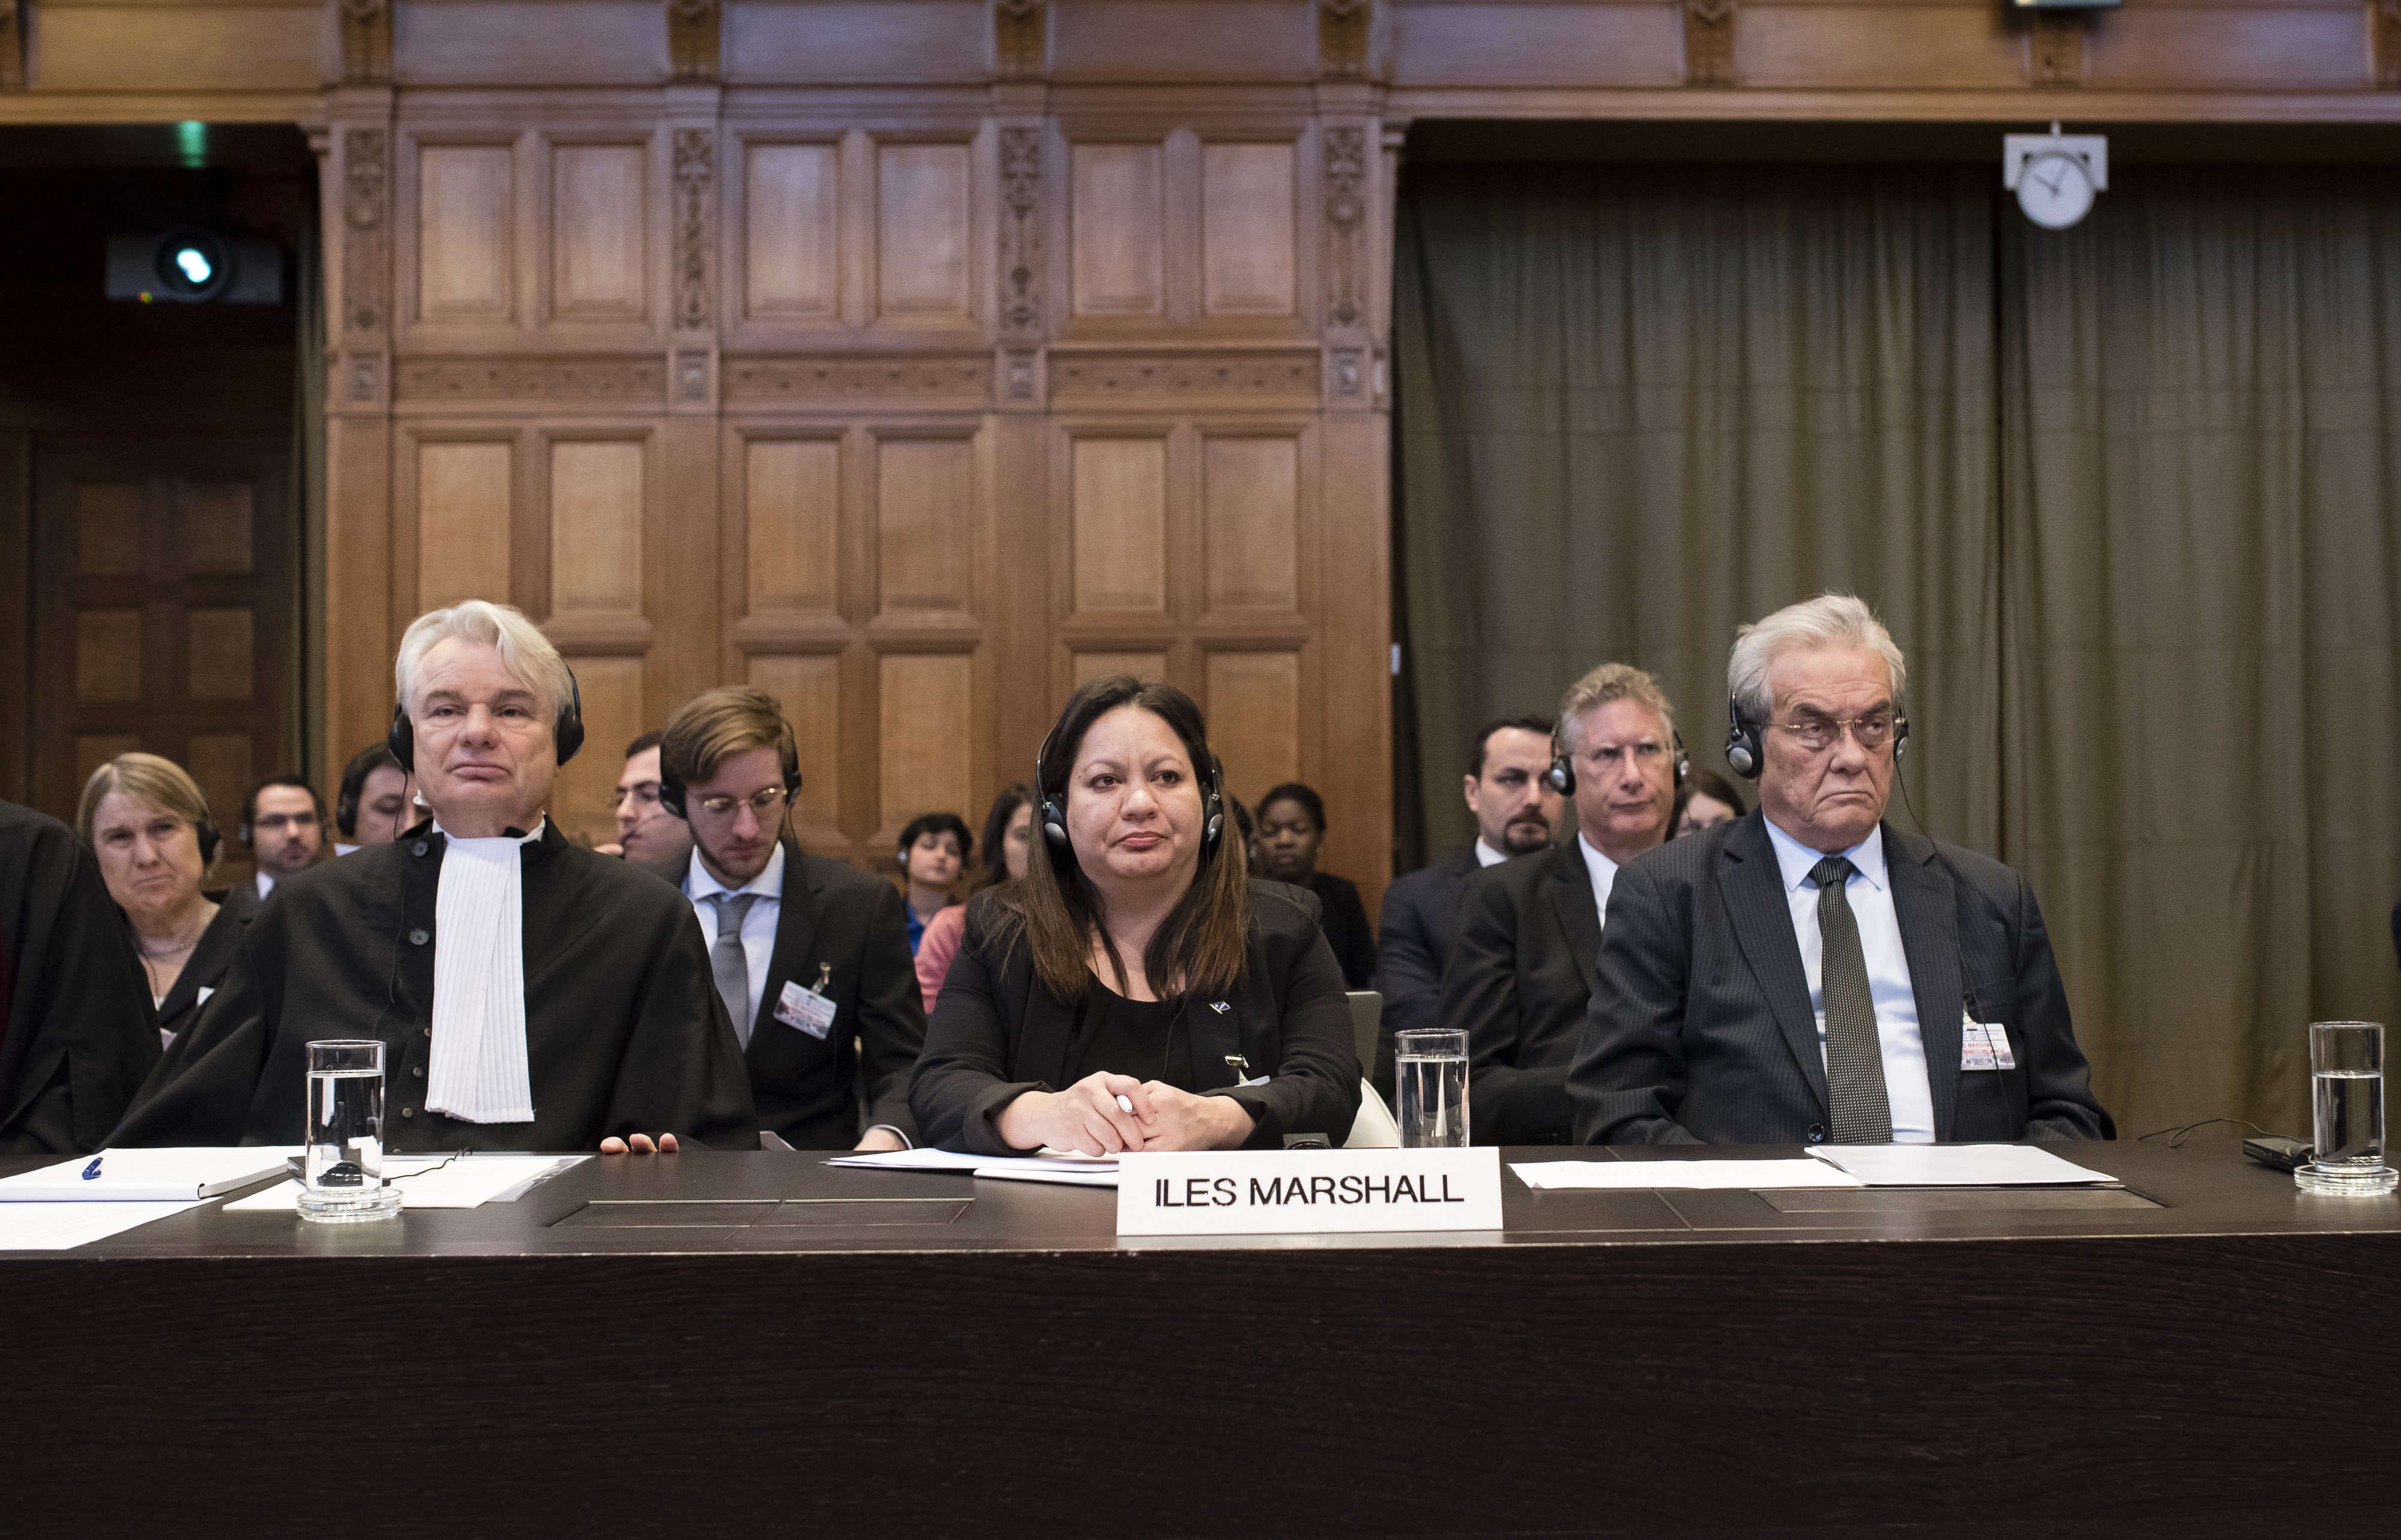 The International Court of Justice (ICJ, principal judicial organ of the UN), holds hearings from 7-16 March 2016 in three distinct cases filed by the Republic of the Marshall Islands against India, Pakistan and the United Kingdom, with regard to Obligations concerning Negotiations relating to Cessation of the Nuclear Arms Race and to Nuclear Disarmament (hearings on preliminary arguments exclusively).